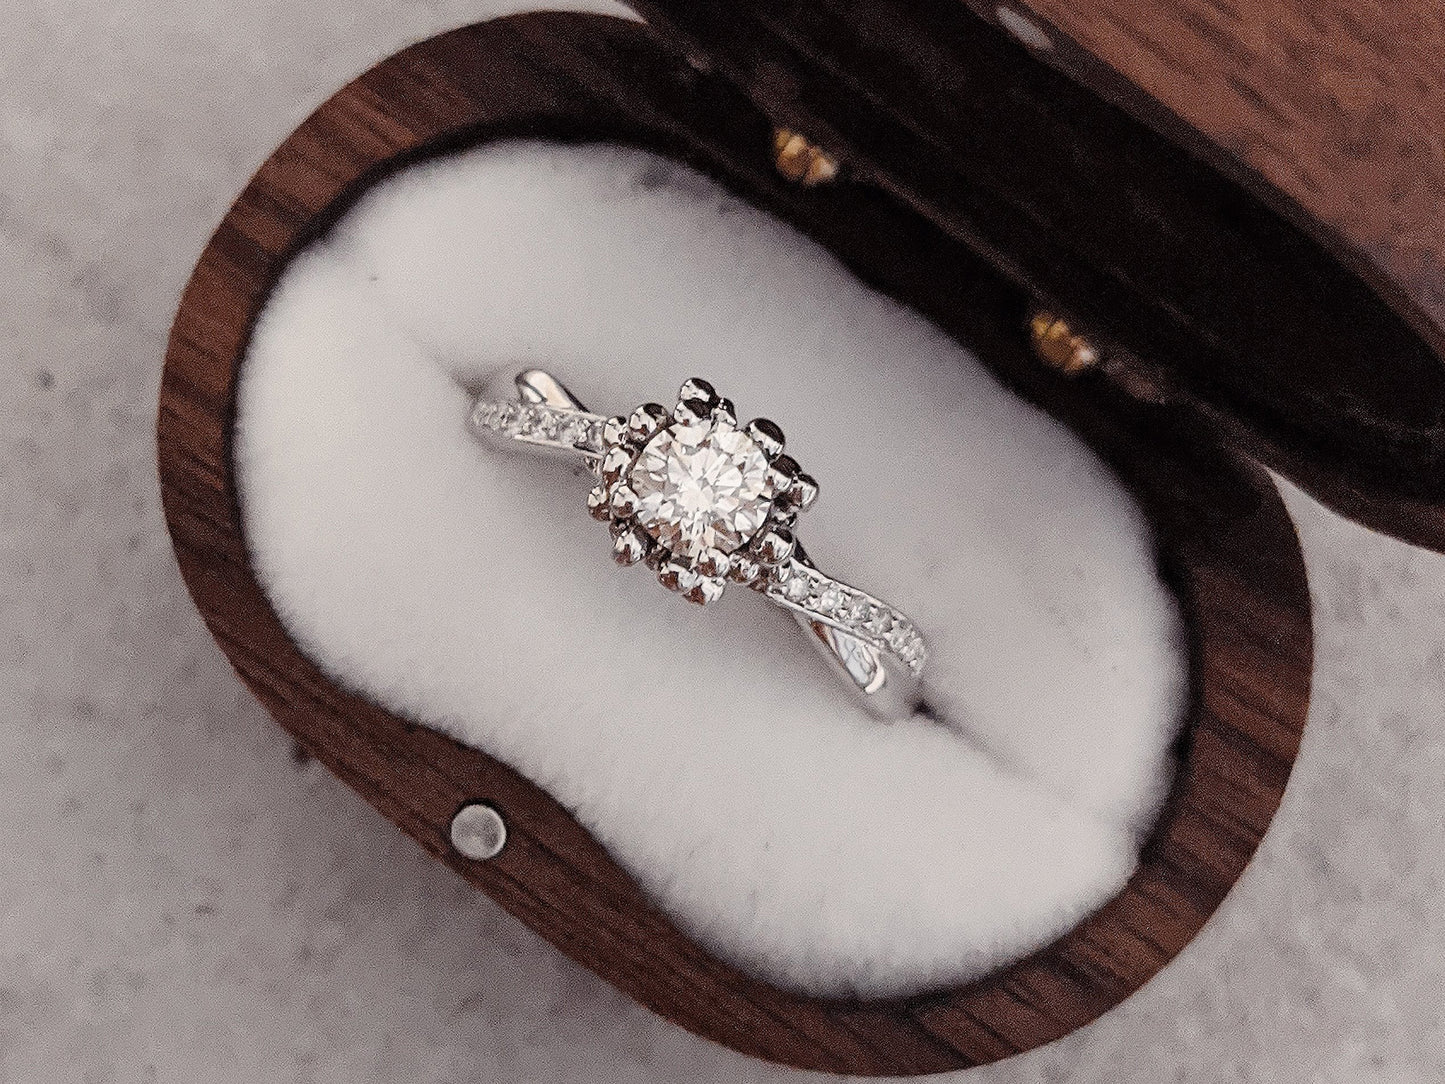 Diamond Solitaire engagement ring with a twist | 9k White Gold